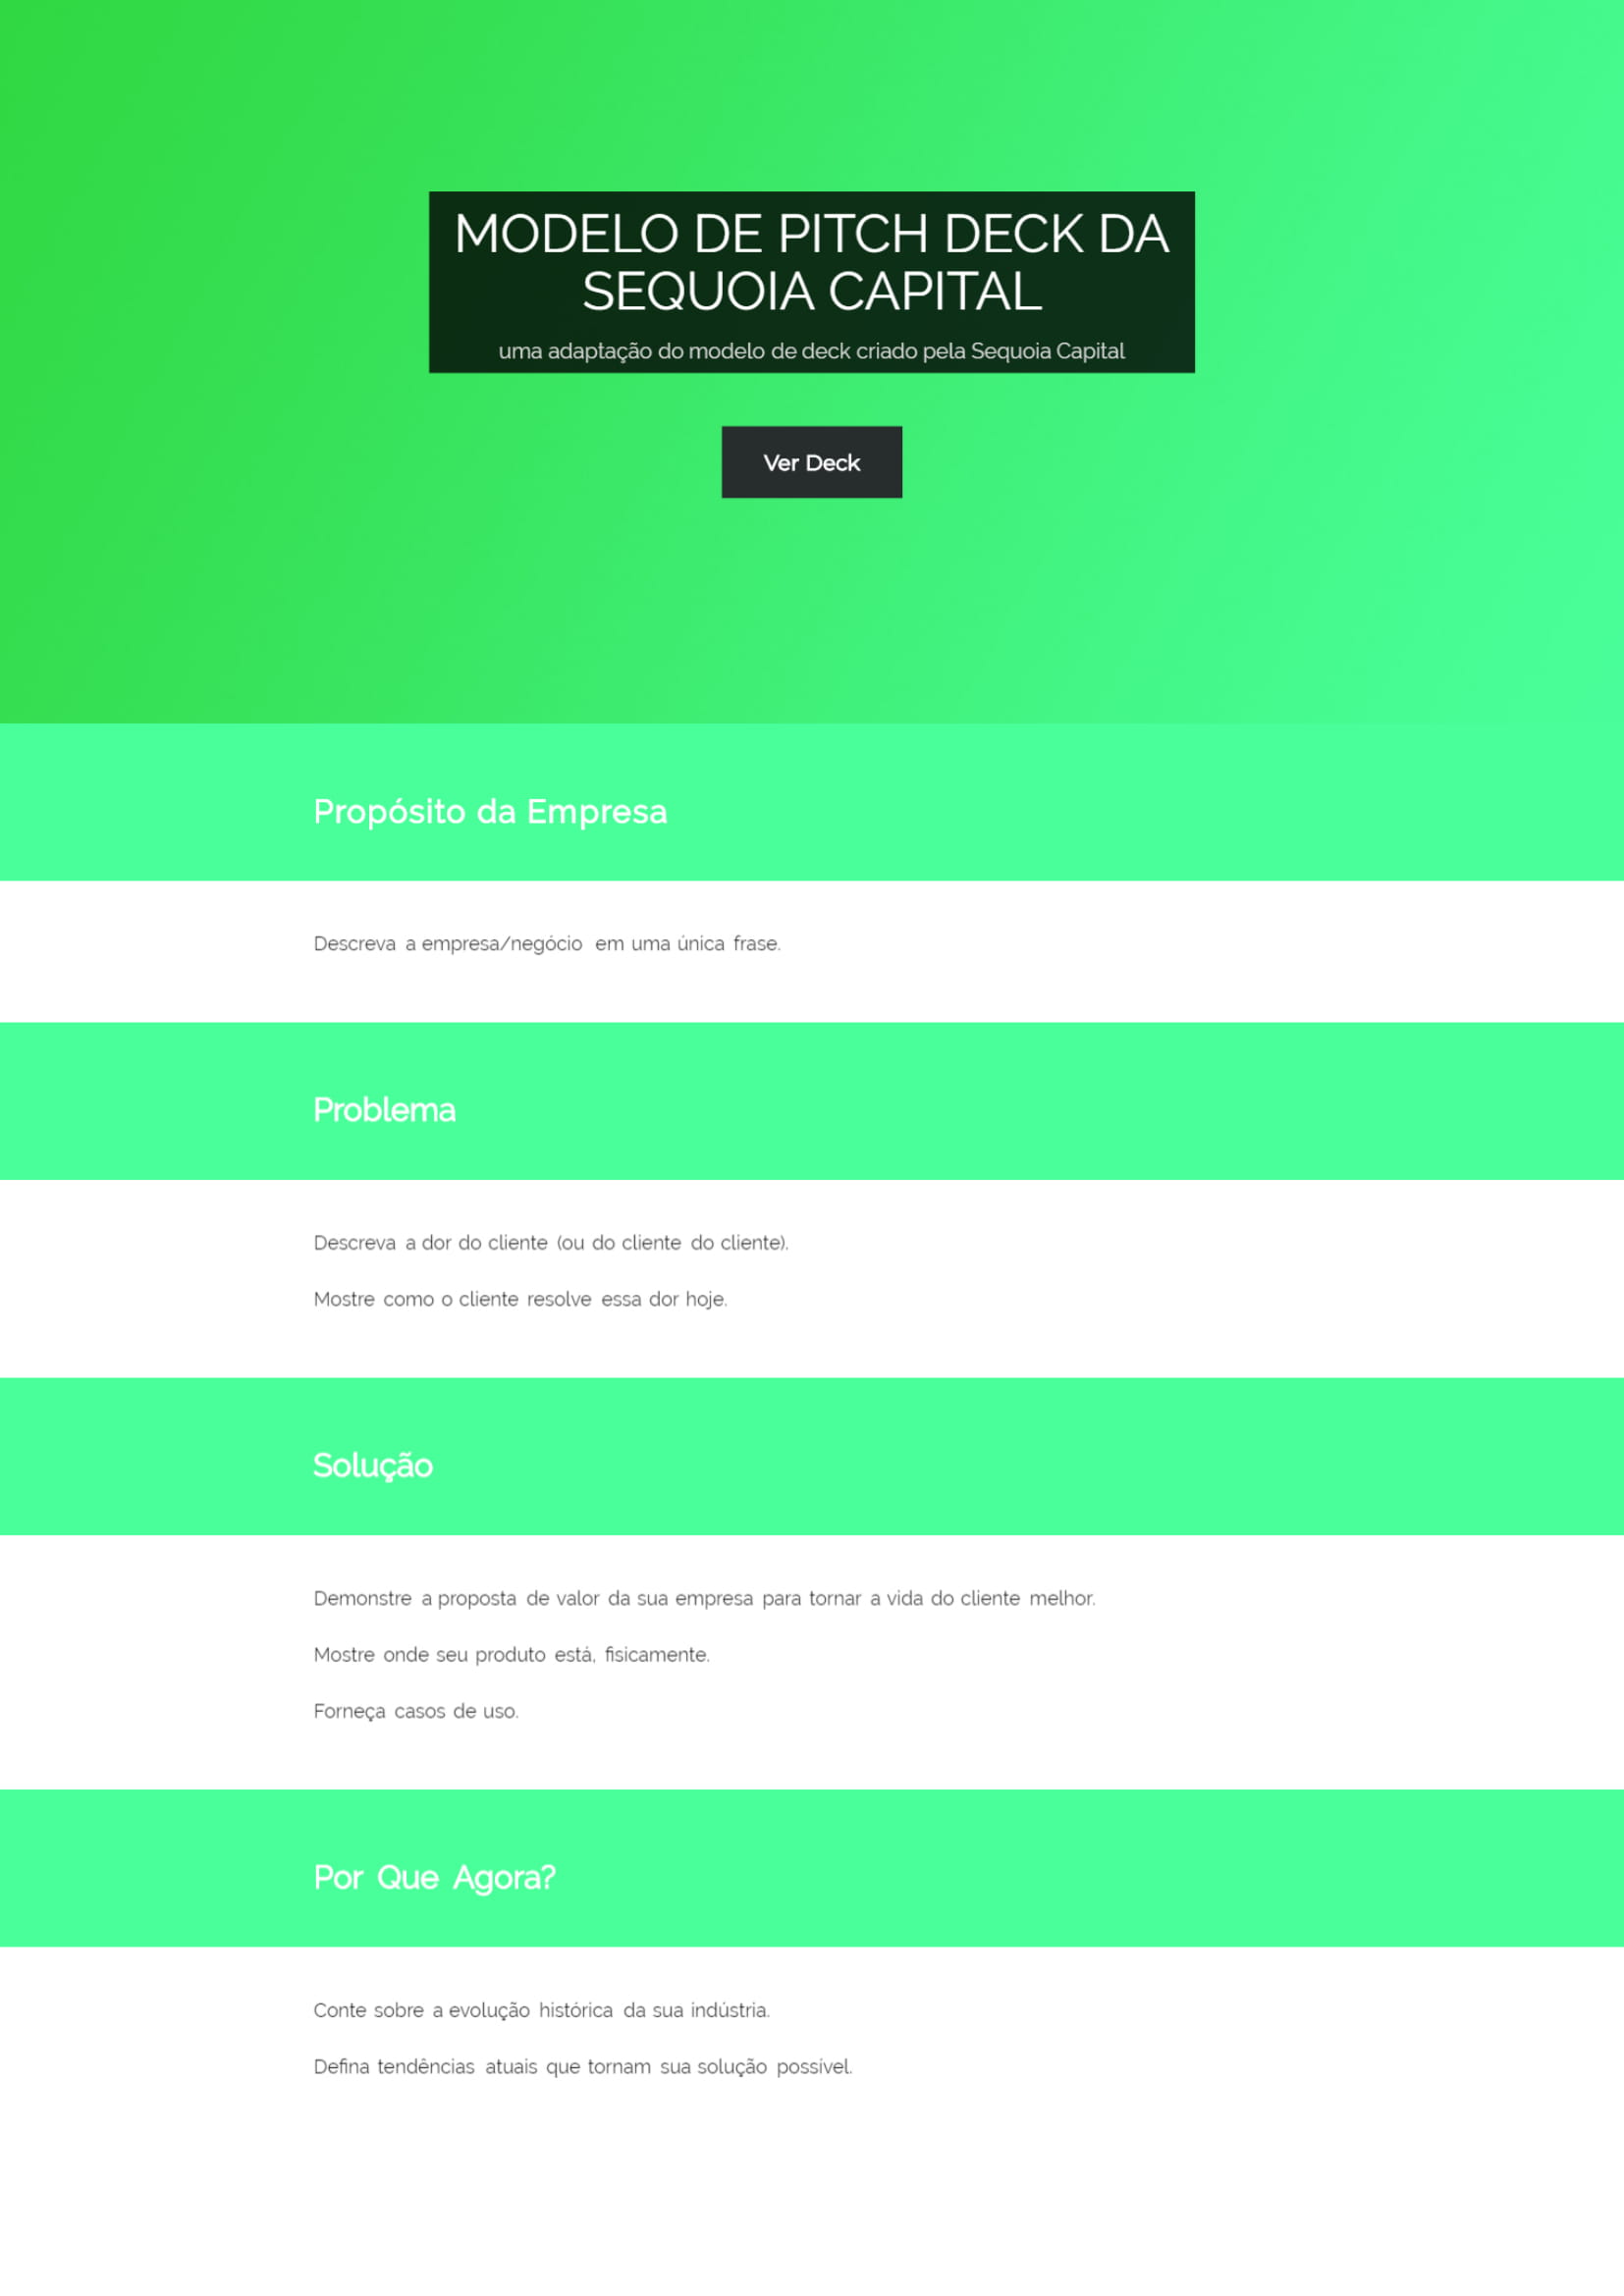 sequoia-capital-pitch-deck-template-1